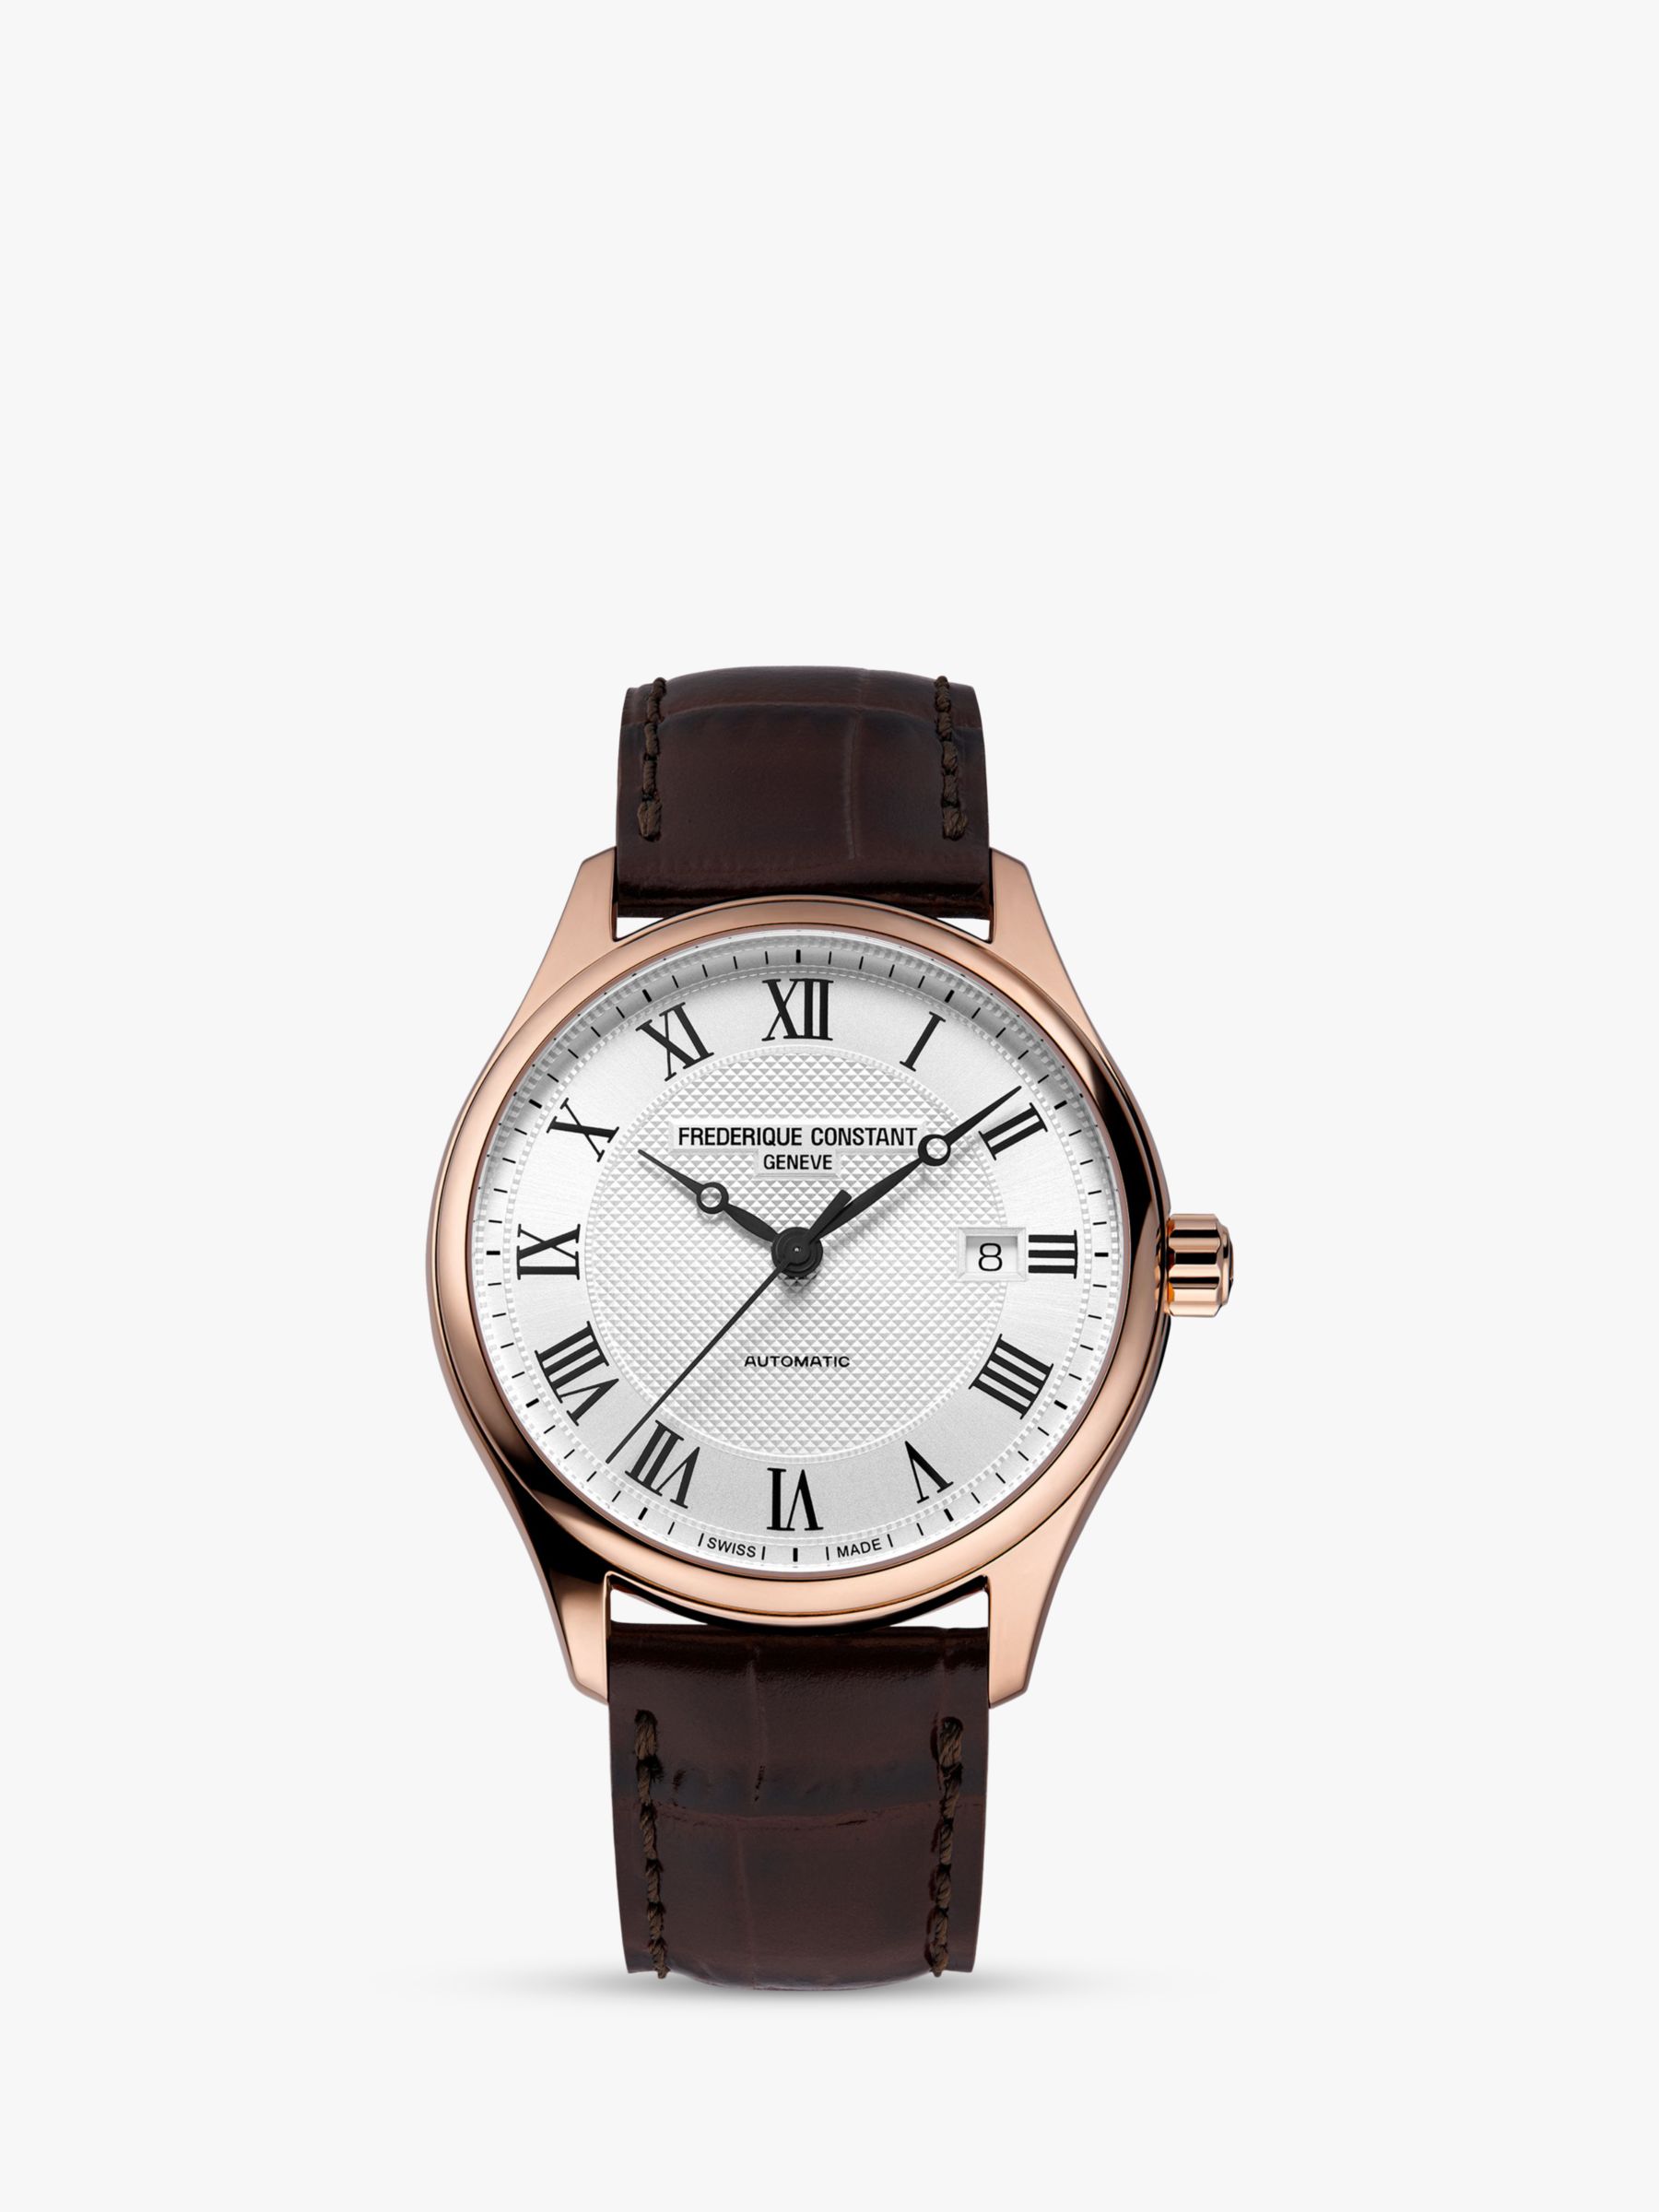 Buy Frederique Constant FC-303MC5B4 Men's Classic Index Automatic Leather Strap Watch, Brown/White Online at johnlewis.com